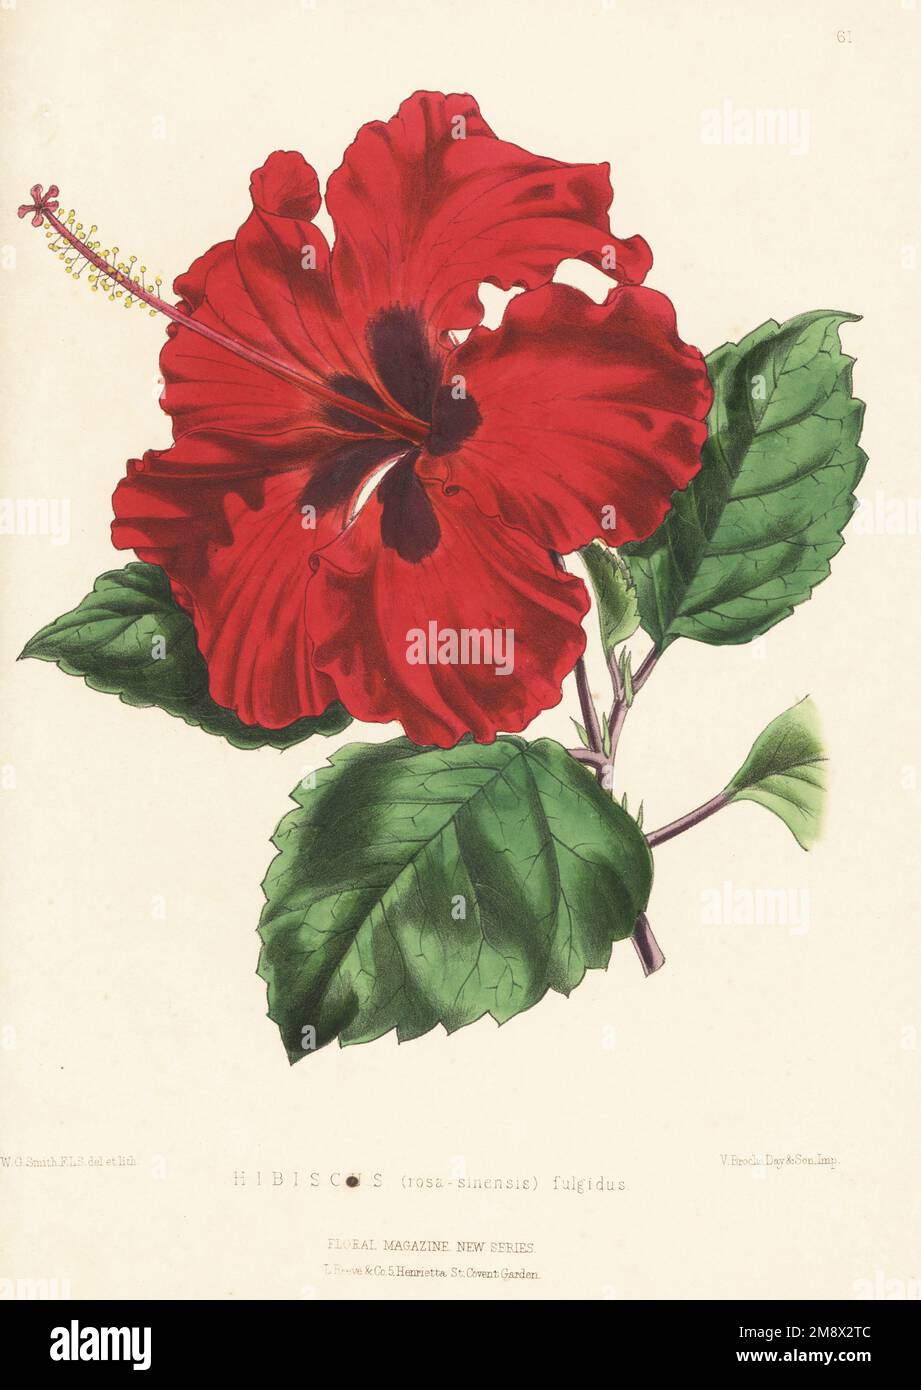 Chinese hibiscus, China rose, Hawaiian hibiscus, rose mallow and shoeblack plant, Hibiscus rosa-sinensis. Provided by William Bull of King's Road, Chelsea, from the South Sea Islands. As Hibiscus (rosa-sinensis) fulgidus. Handcolored botanical illustration drawn and lithographed by Worthington George Smith from Henry Honywood Dombrain's Floral Magazine, New Series, Volume 2, L. Reeve, London, 1873. Lithograph printed  by Vincent Brooks, Day & Son. Stock Photo